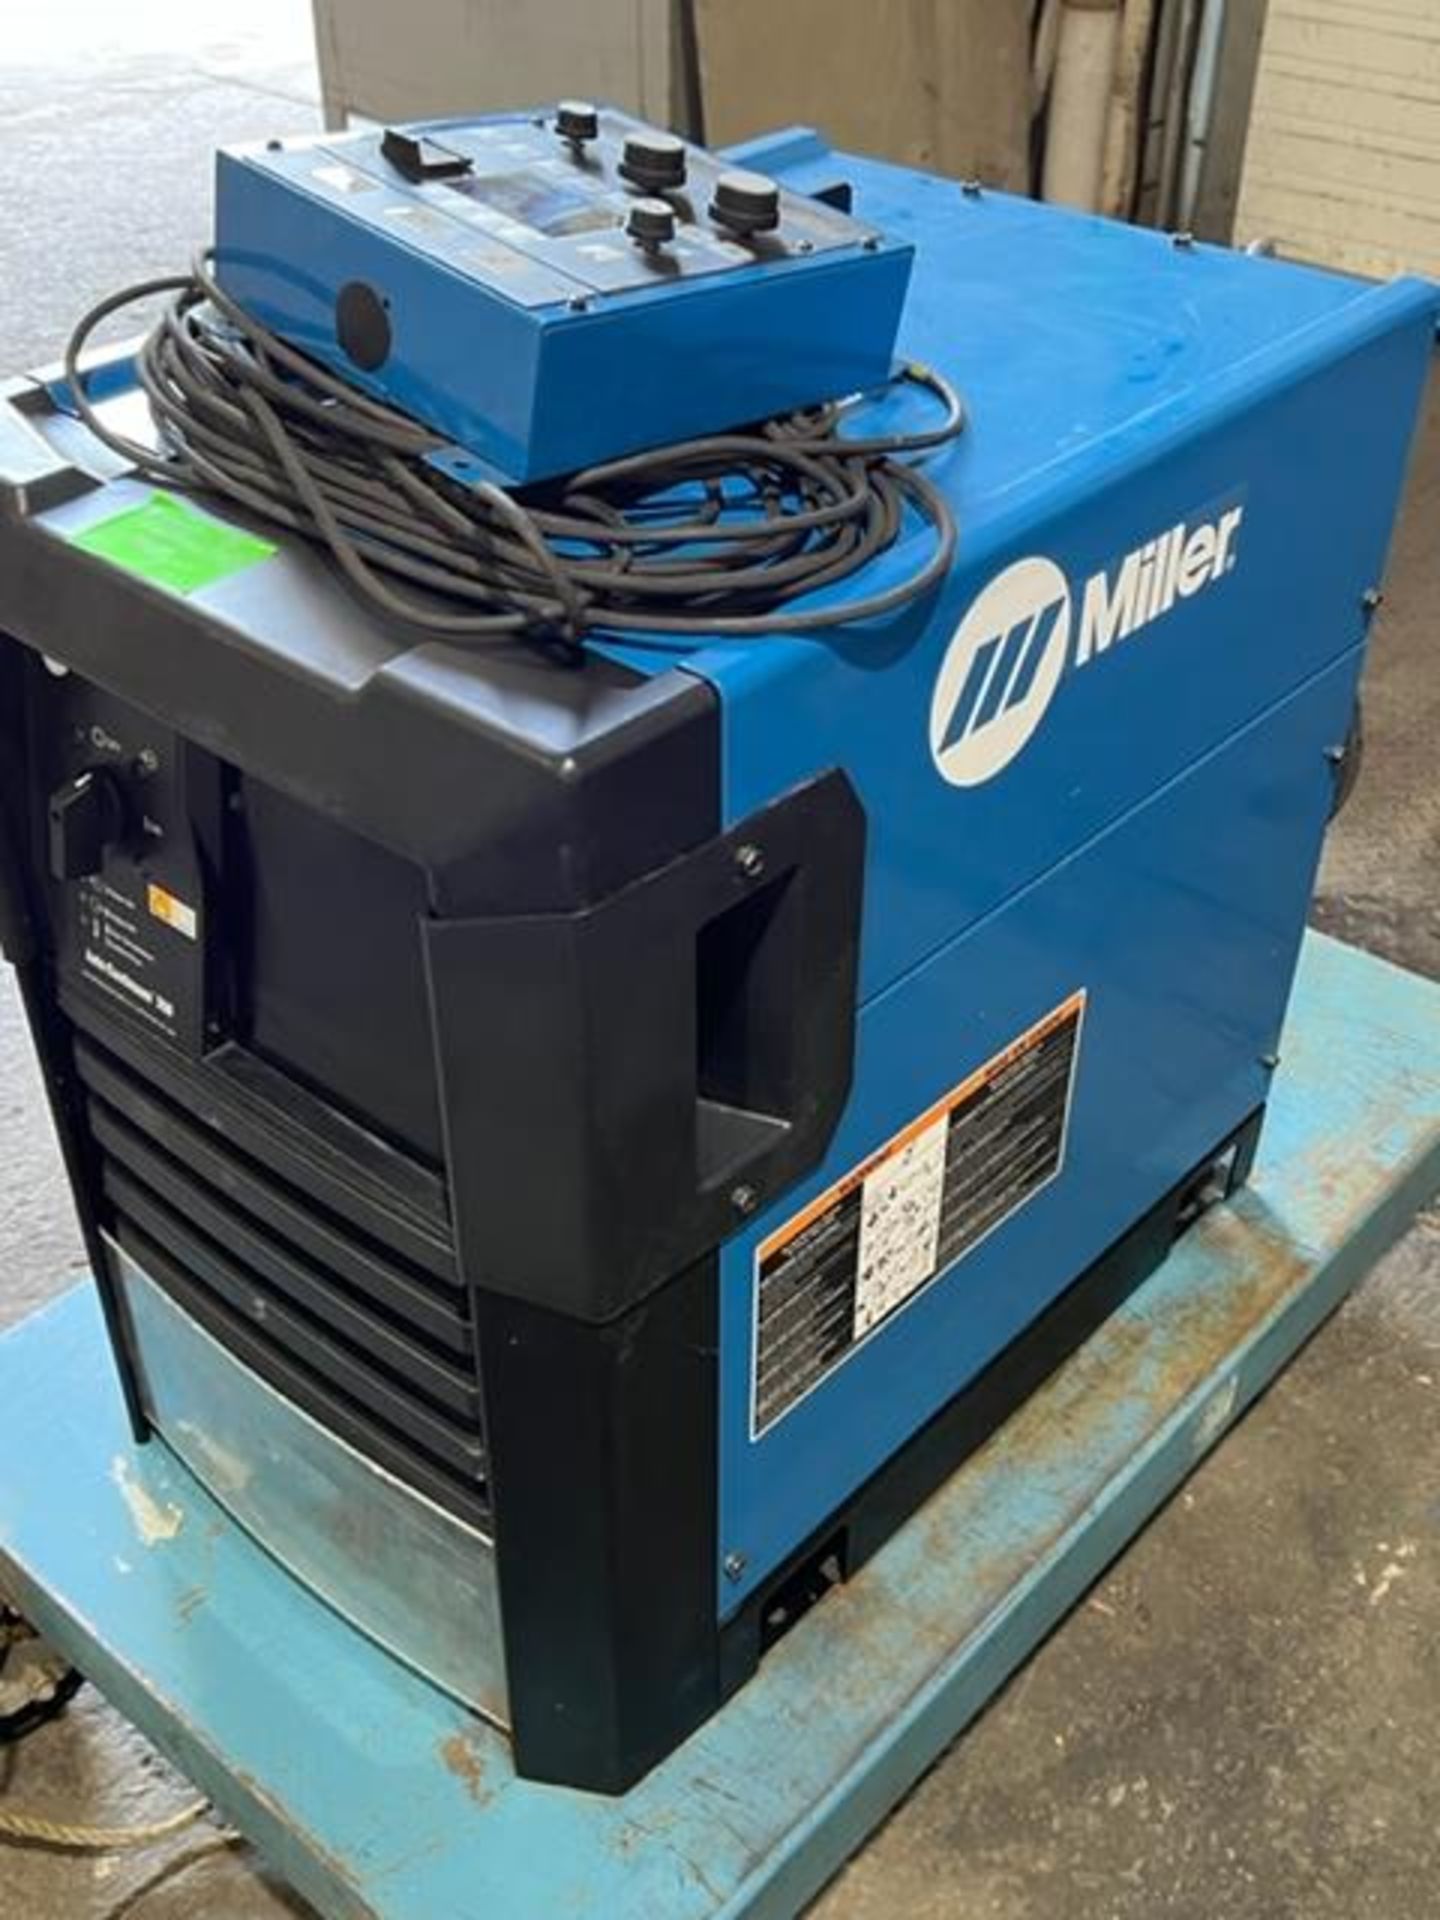 2018 Miller Auto-Continuum 350 Mig Welder - Robotic and manual 350amp on cart with Accessories - Image 2 of 2